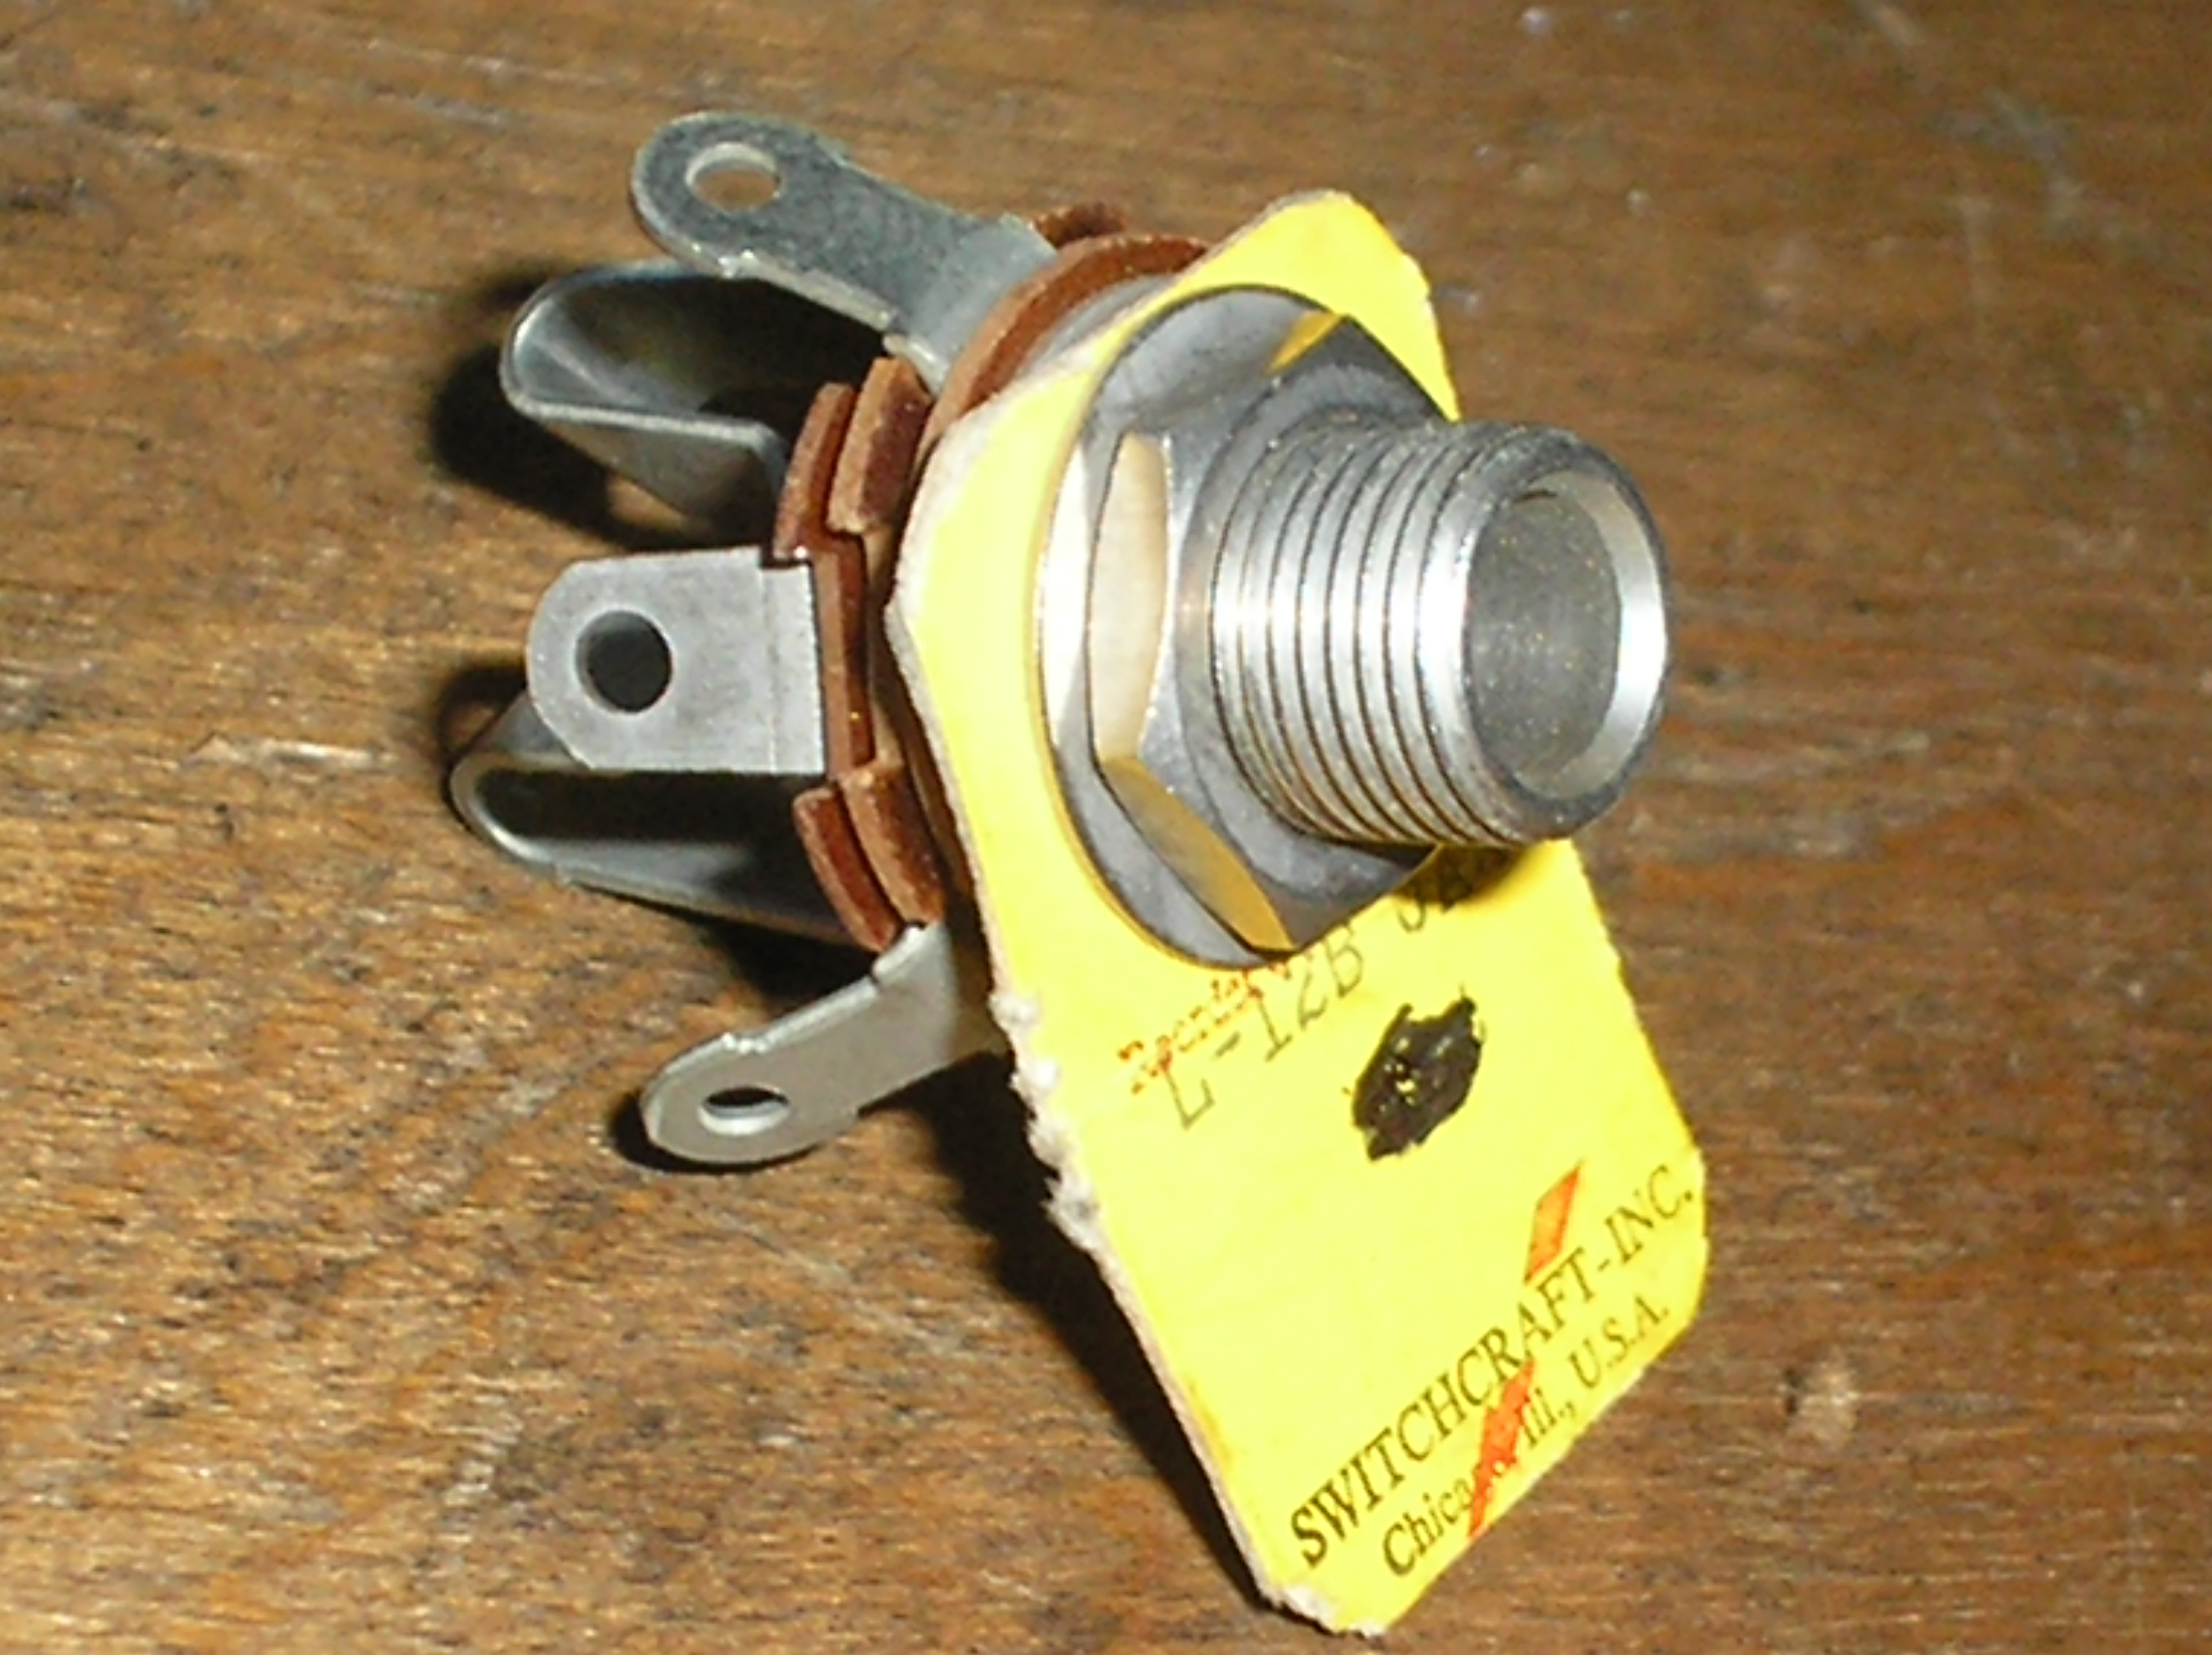 Switchcraft L12B Stereo 1/4'' Input Jack (w/ Extra Long Thread 3/8'') Extra long threads for guitars and audio jacks... New Old Stock

16 Available